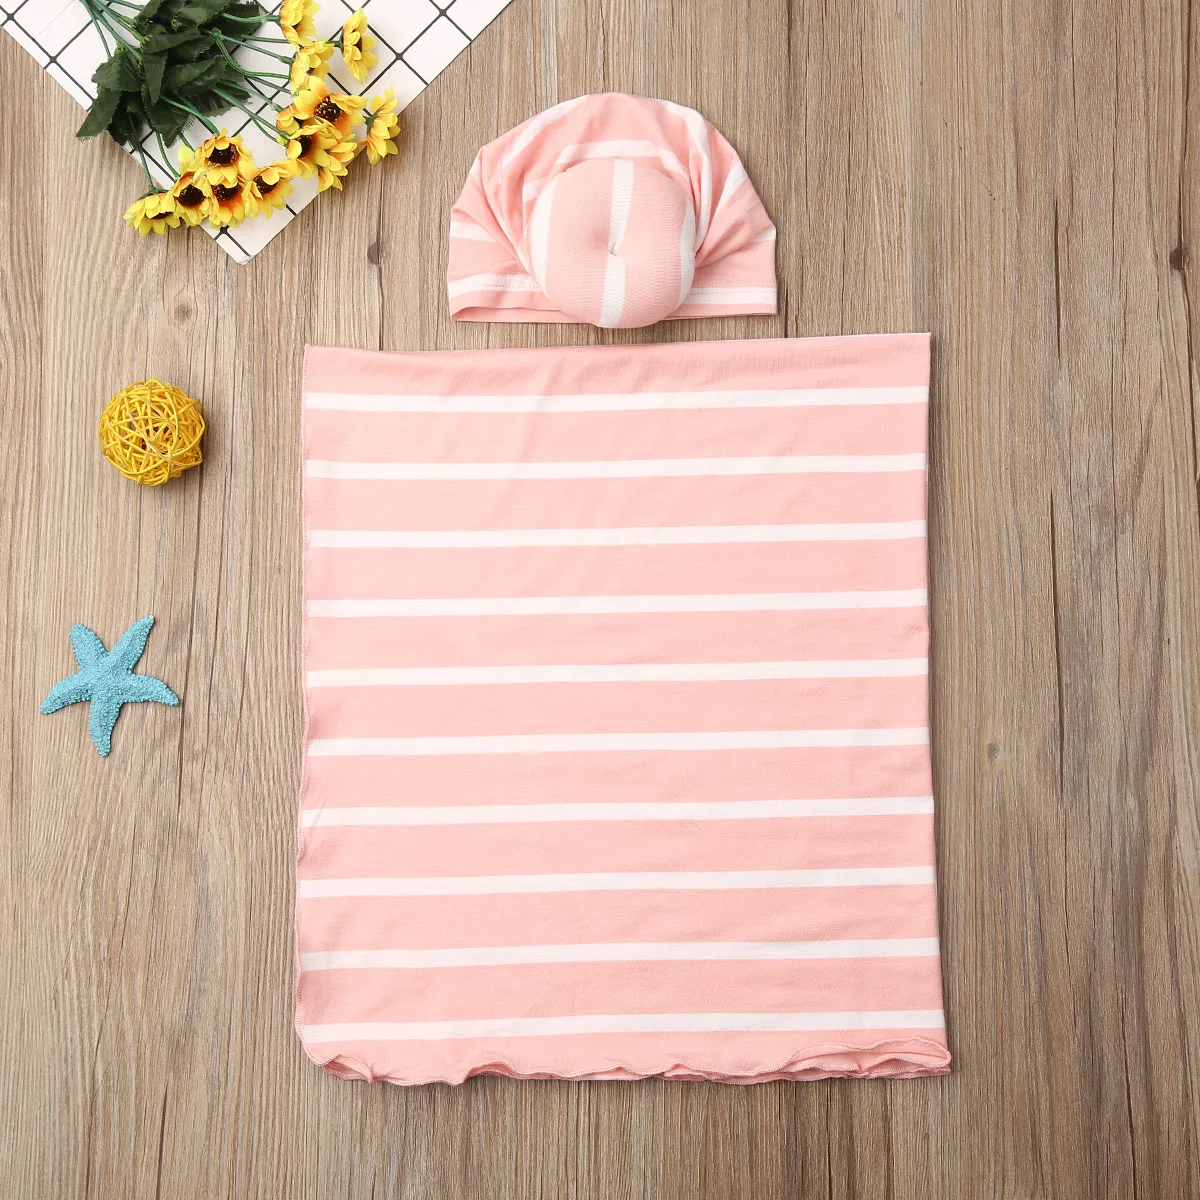 Pudcoco Newborn Baby Boy Girl Clothes Solid Color Soft Swaddle Muslin Blanket Wrap Swaddling Blanket 2Pcs Outfits Clothes